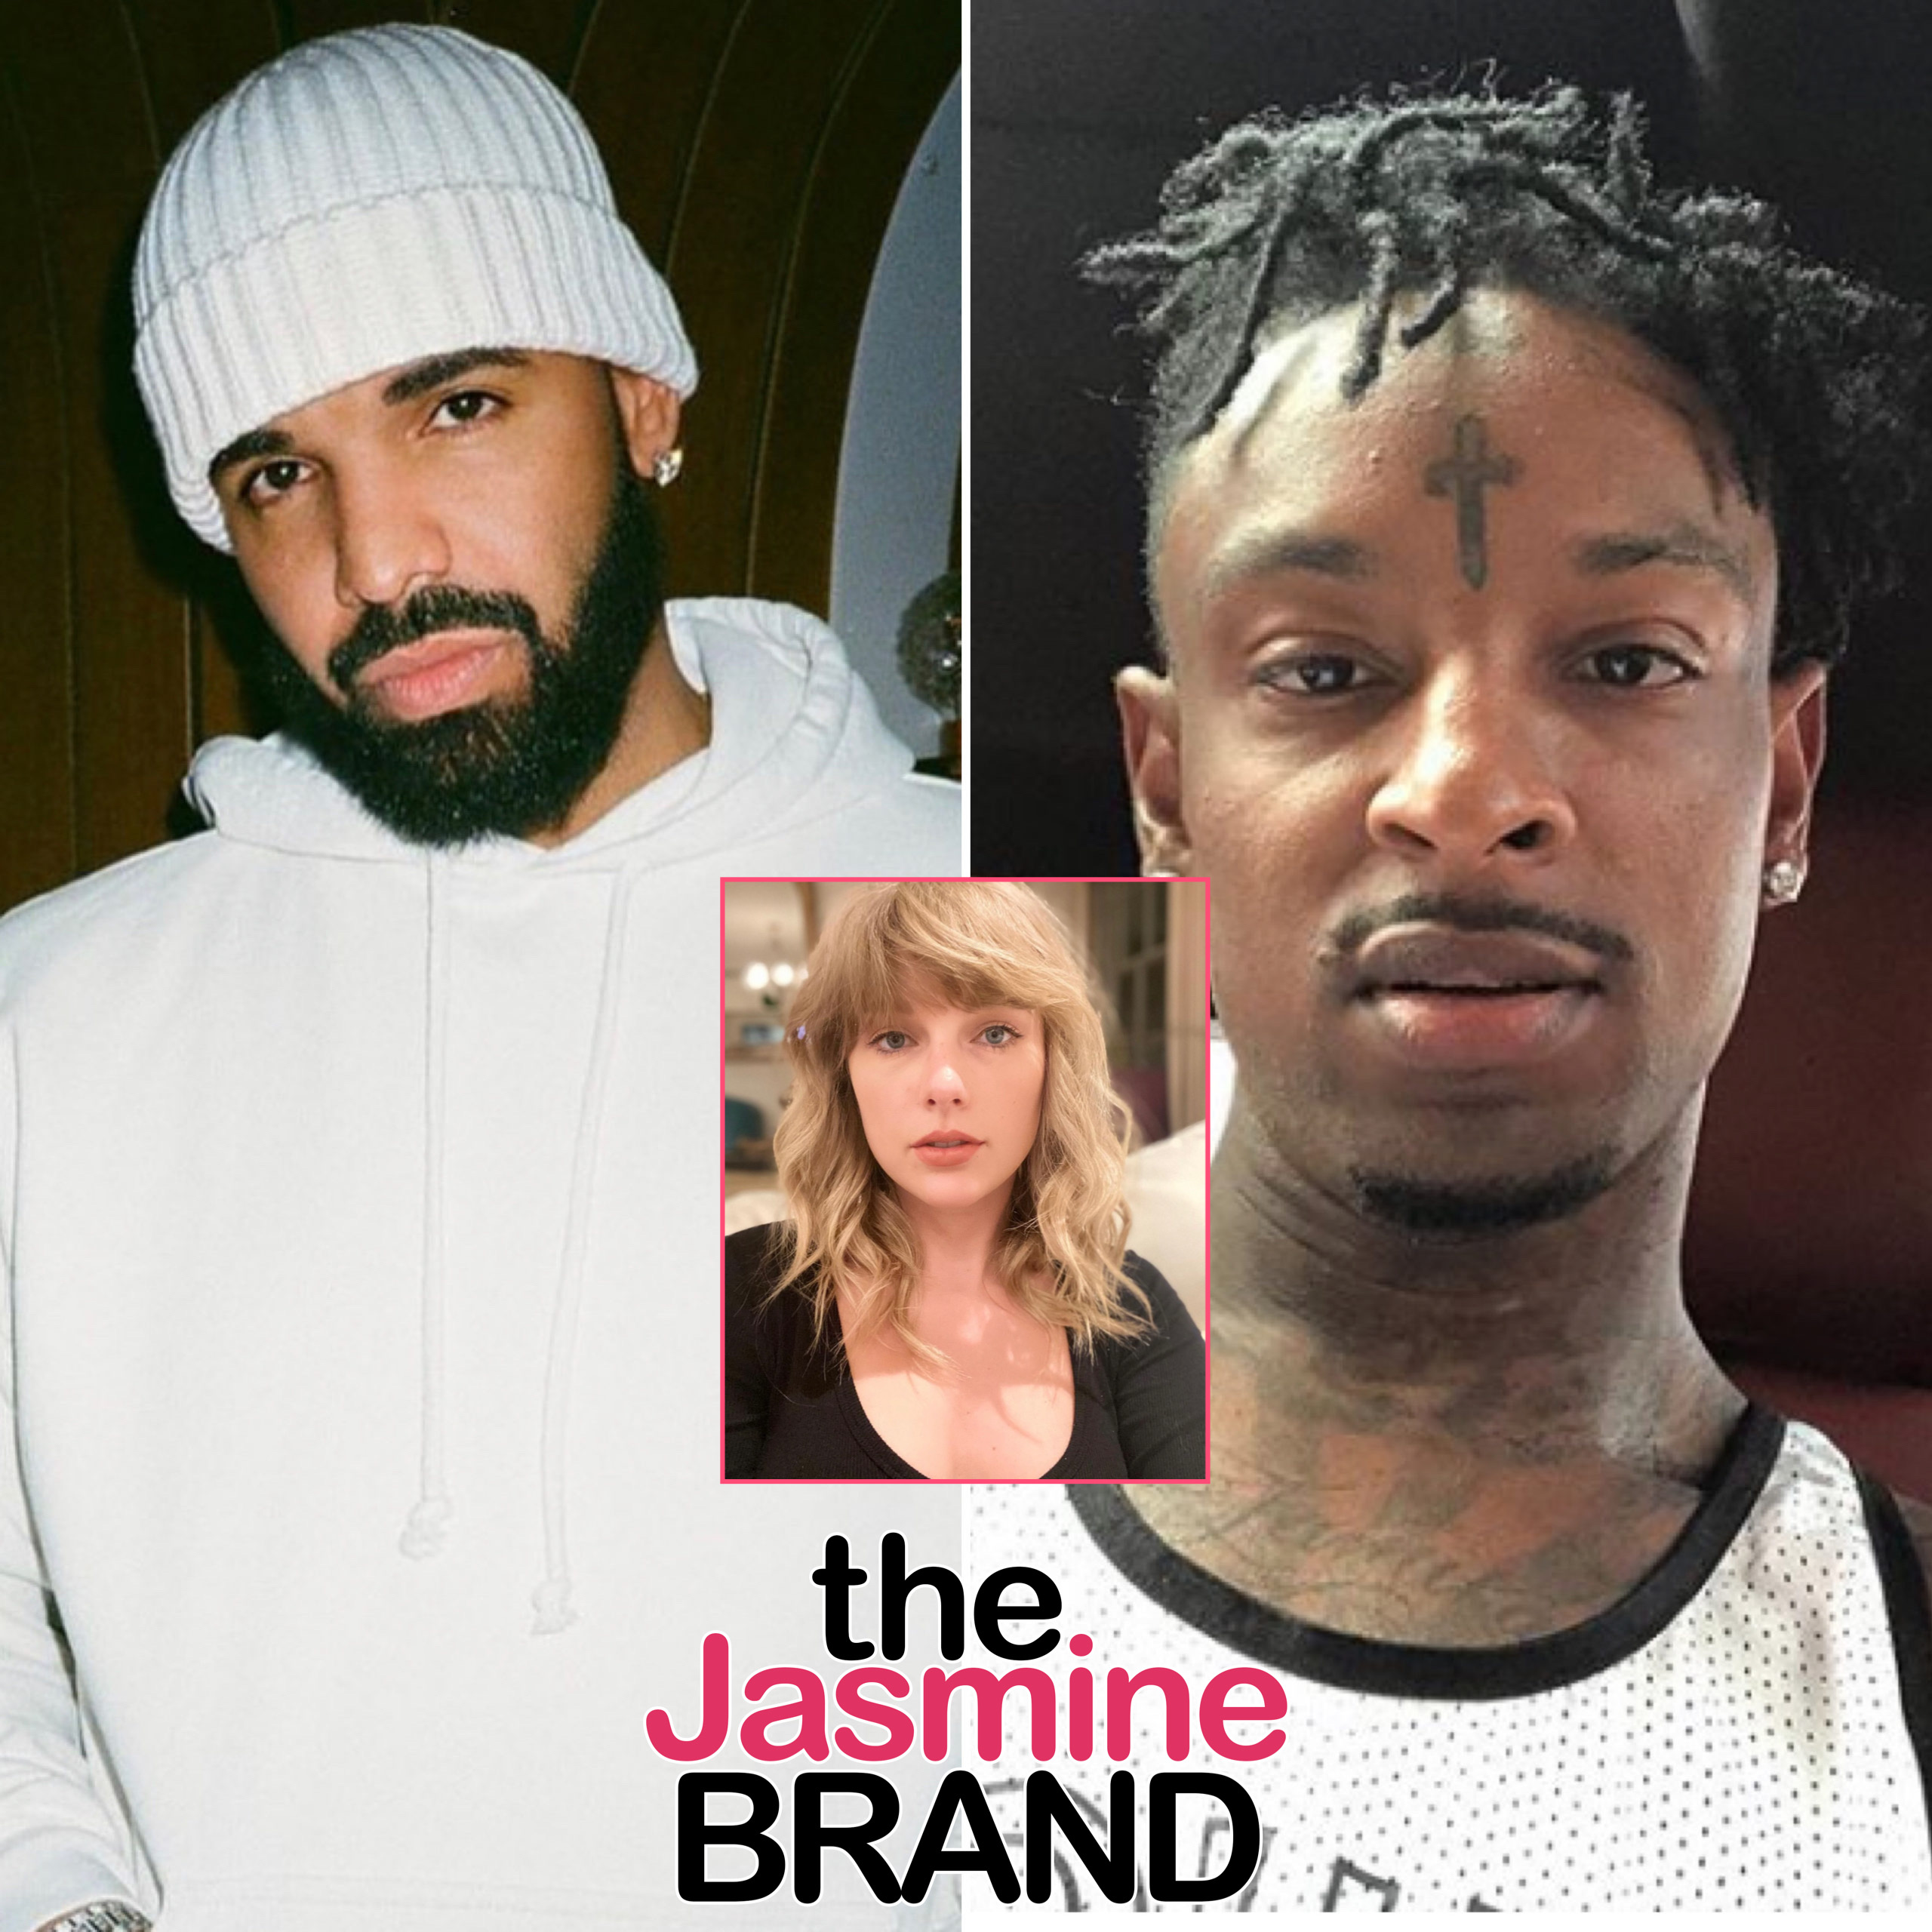 Drake and 21 Savage Bump Taylor Swift From the Top - The New York